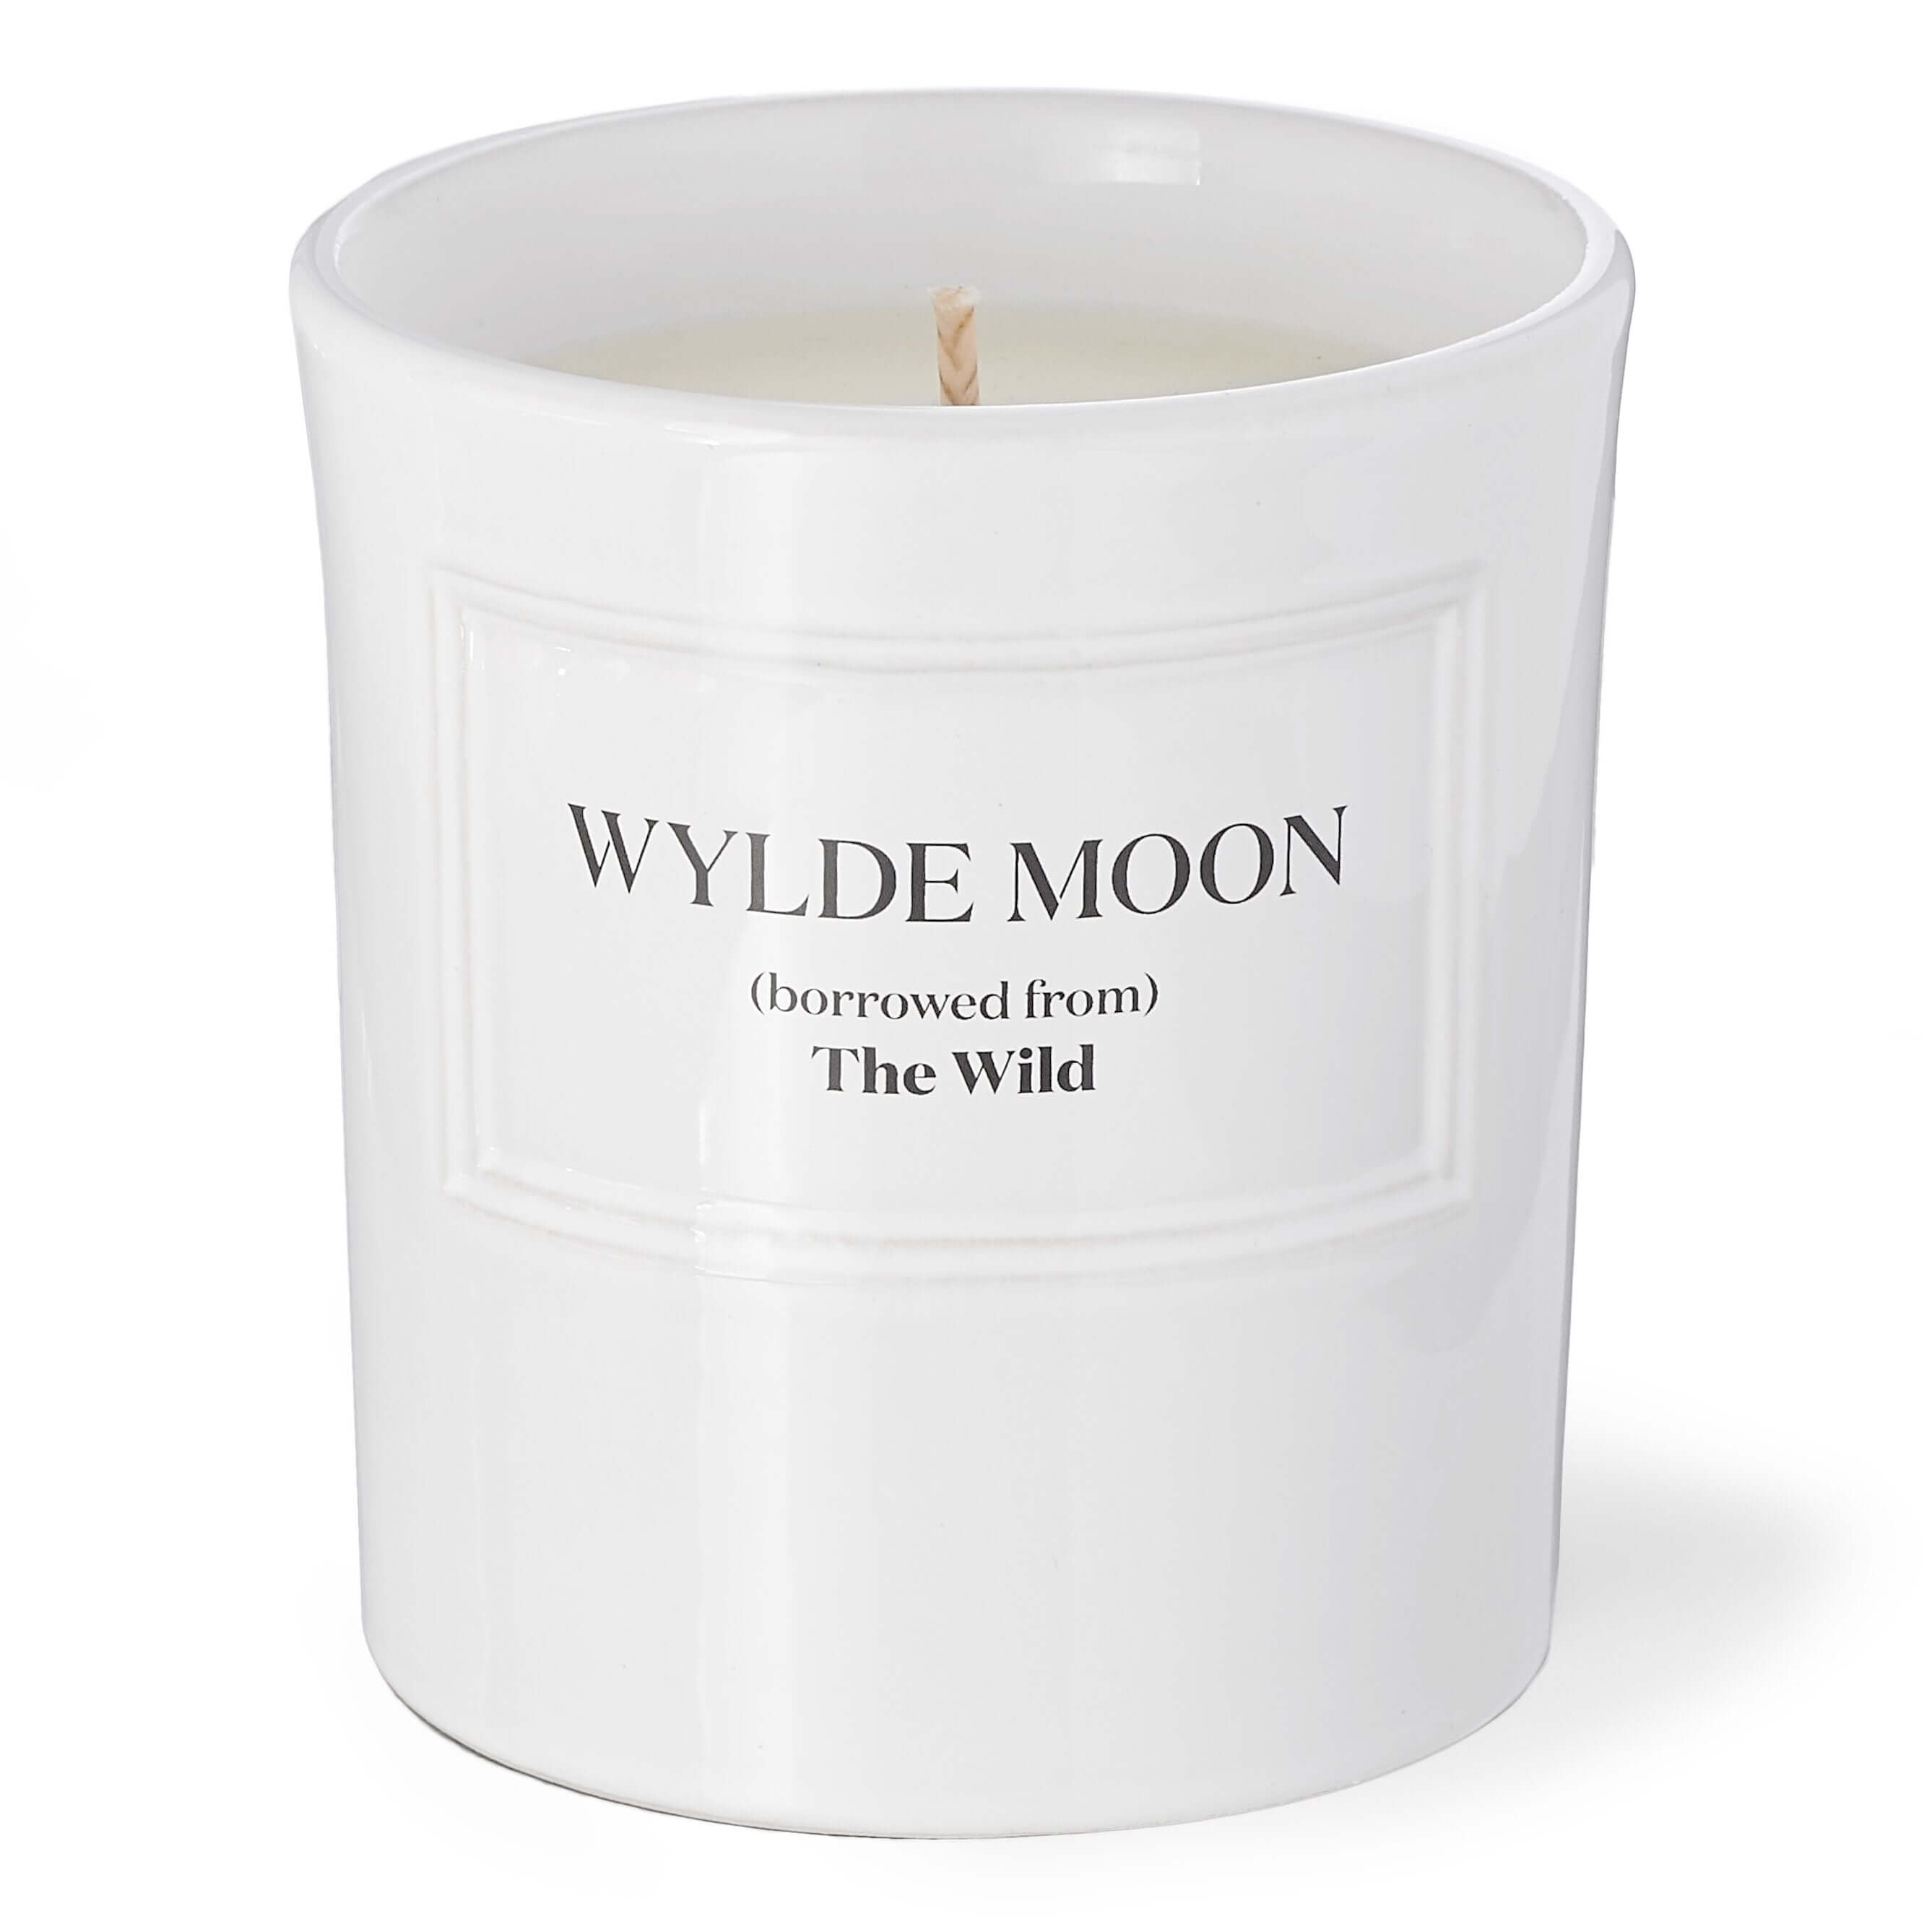 Single wick scented candle with white ceramic pot and lid